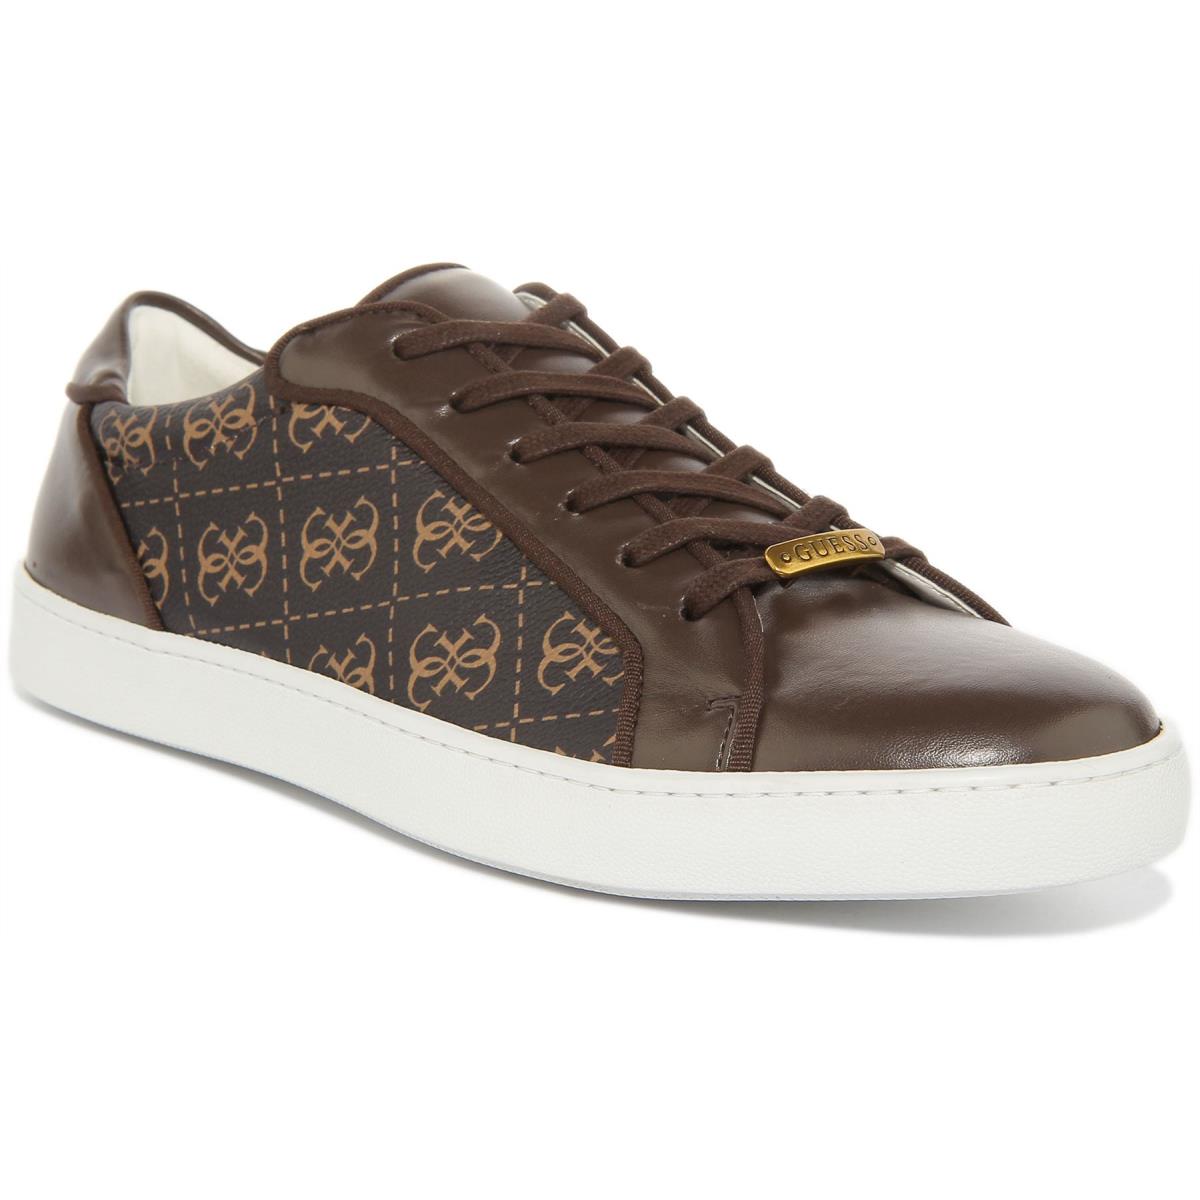 Guess Fm5Lezfal12 Lezzeno Mens Lace Up Low Sneakers In Brown Size US 7 - 13 BROWN